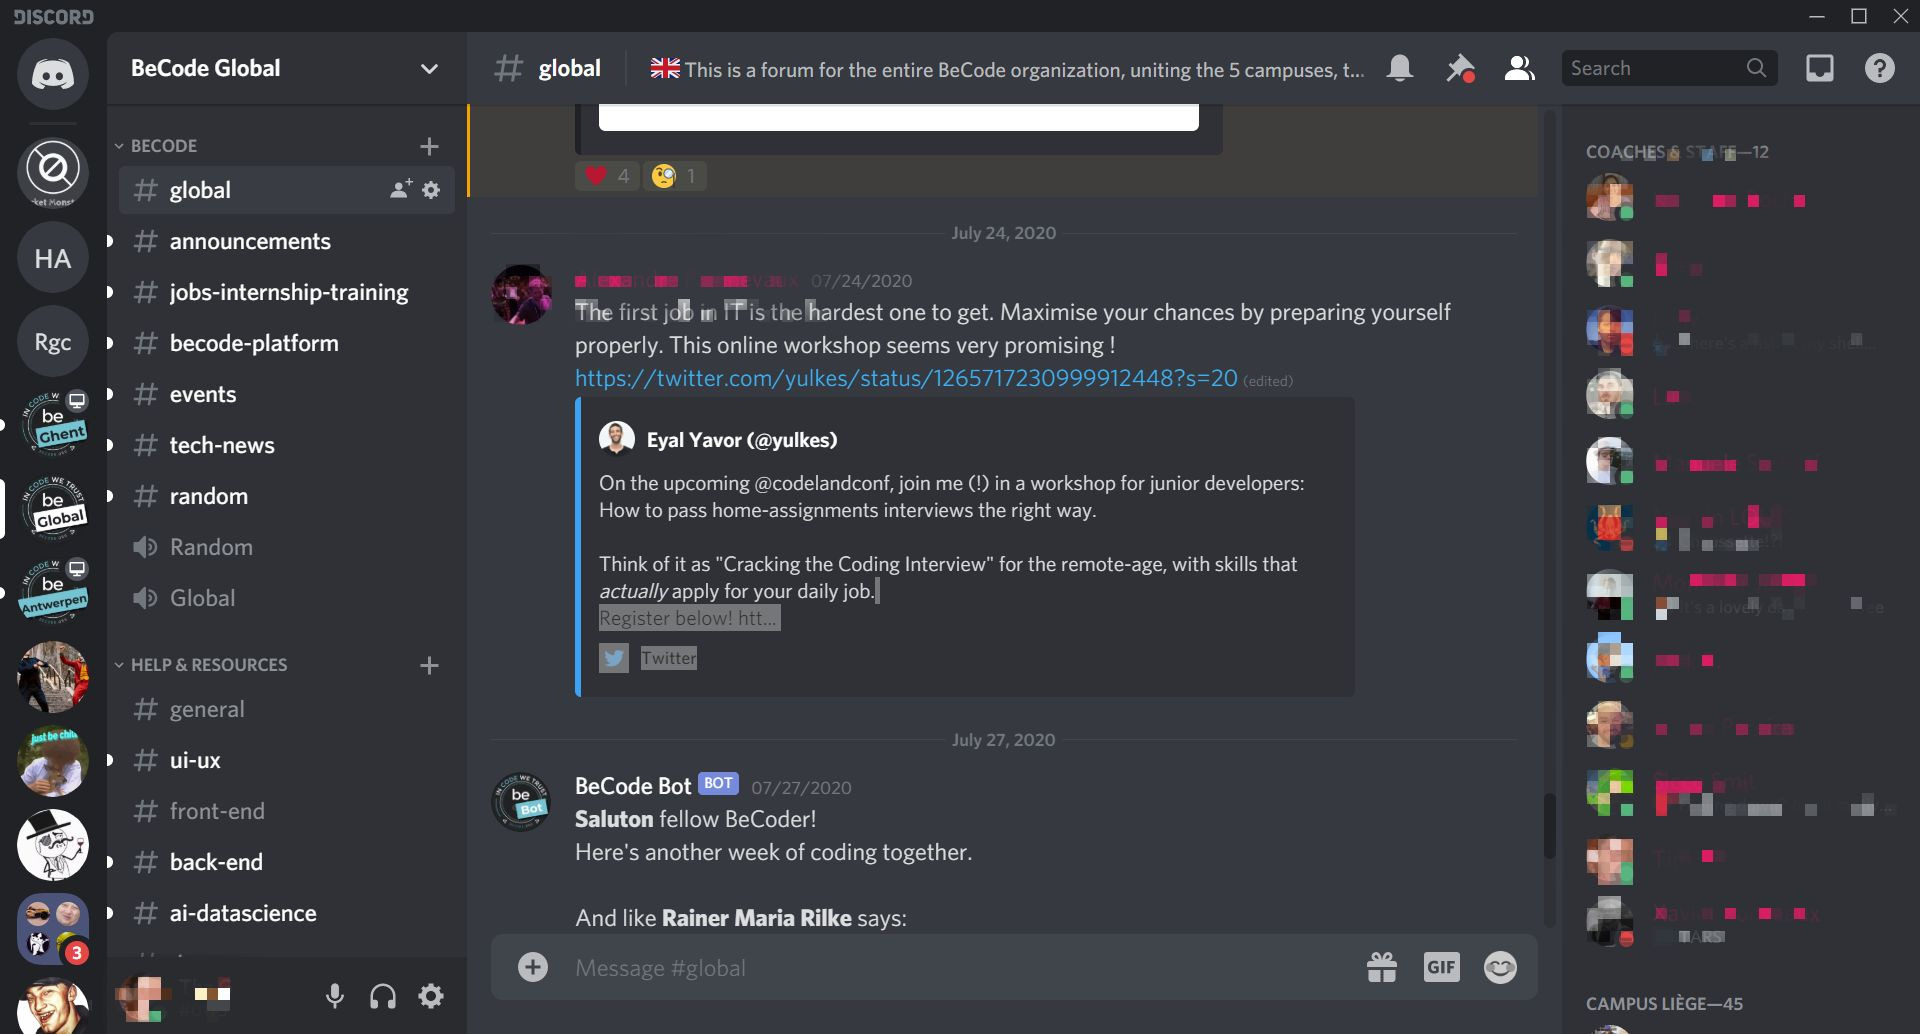 example of the discord interface